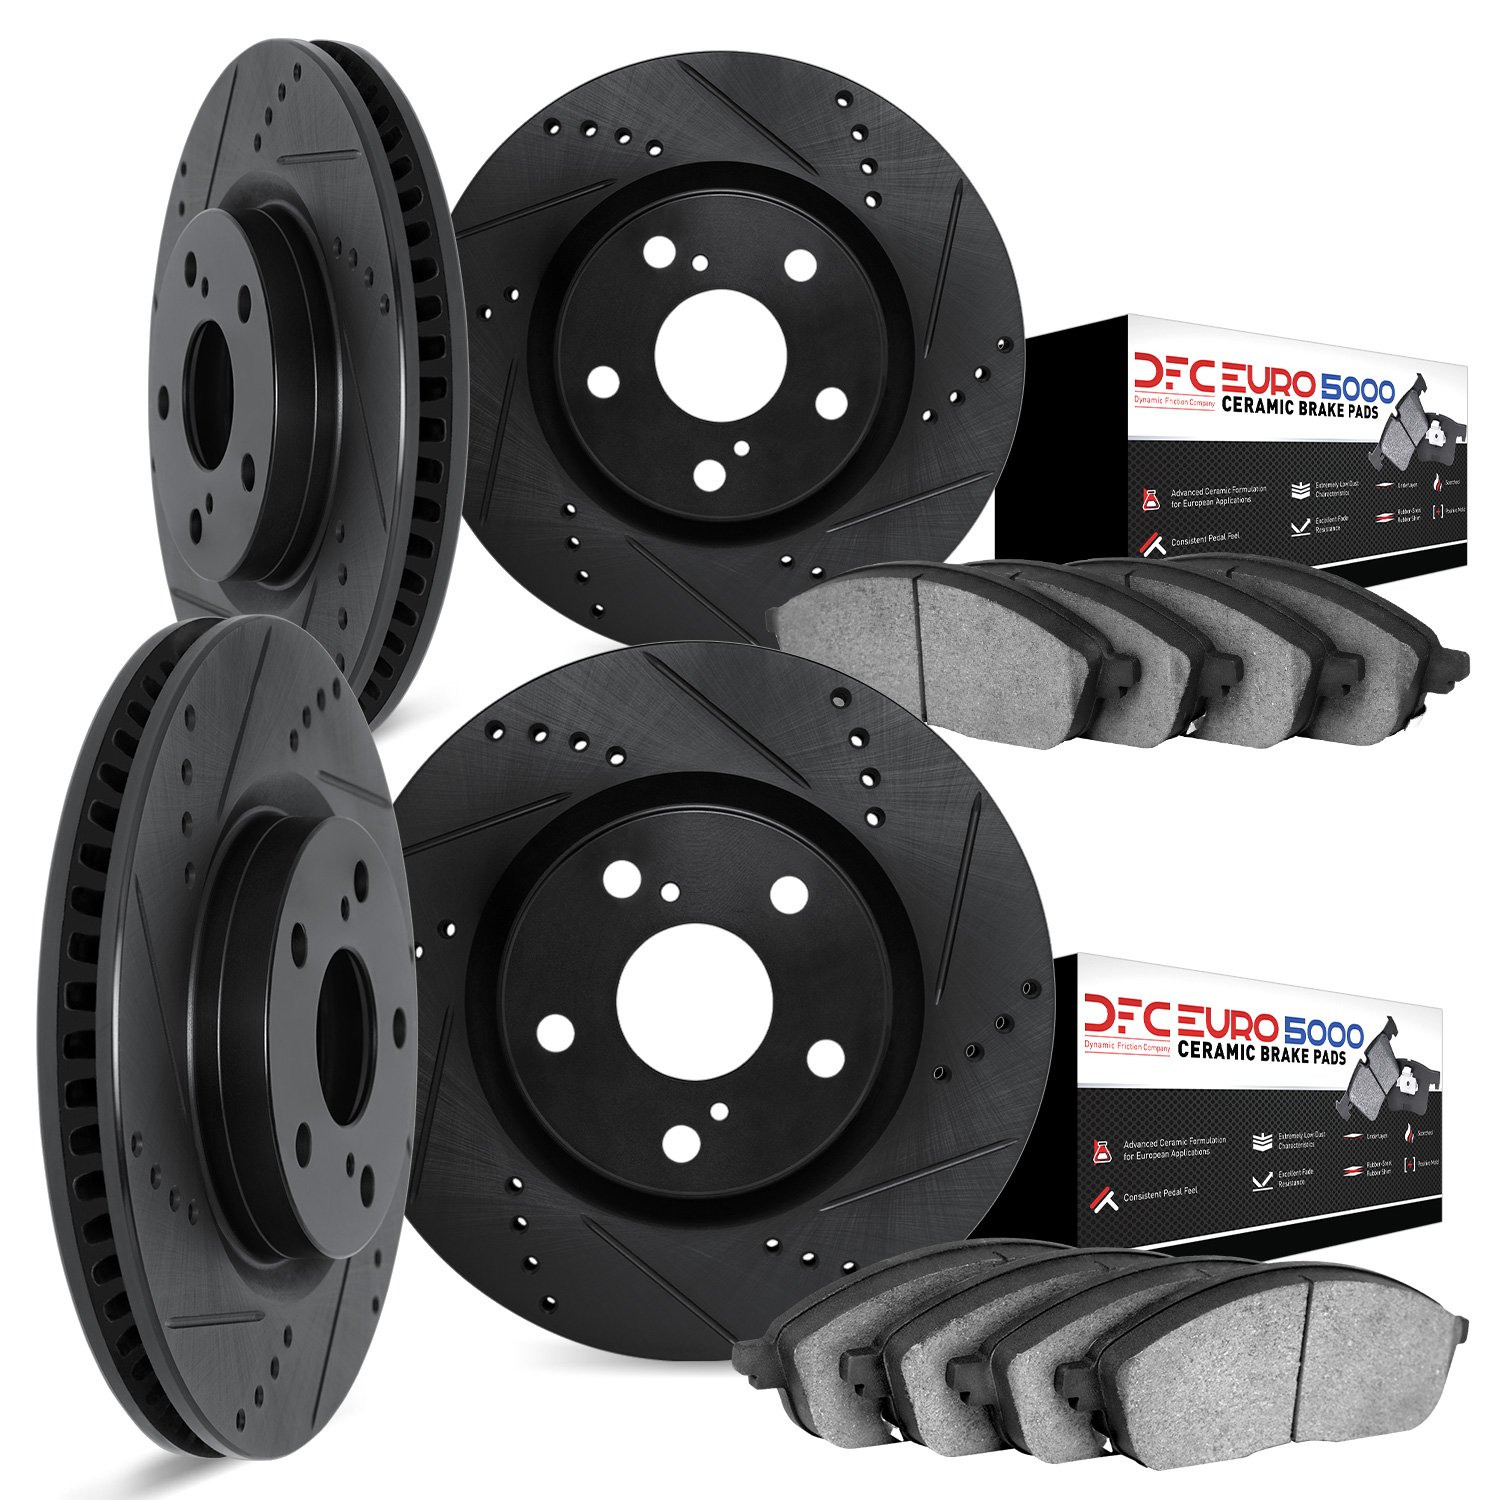 8604-31018 Drilled/Slotted Brake Rotors w/5000 Euro Ceramic Brake Pads Kit [Black], 2006-2006 BMW, Position: Front and Rear